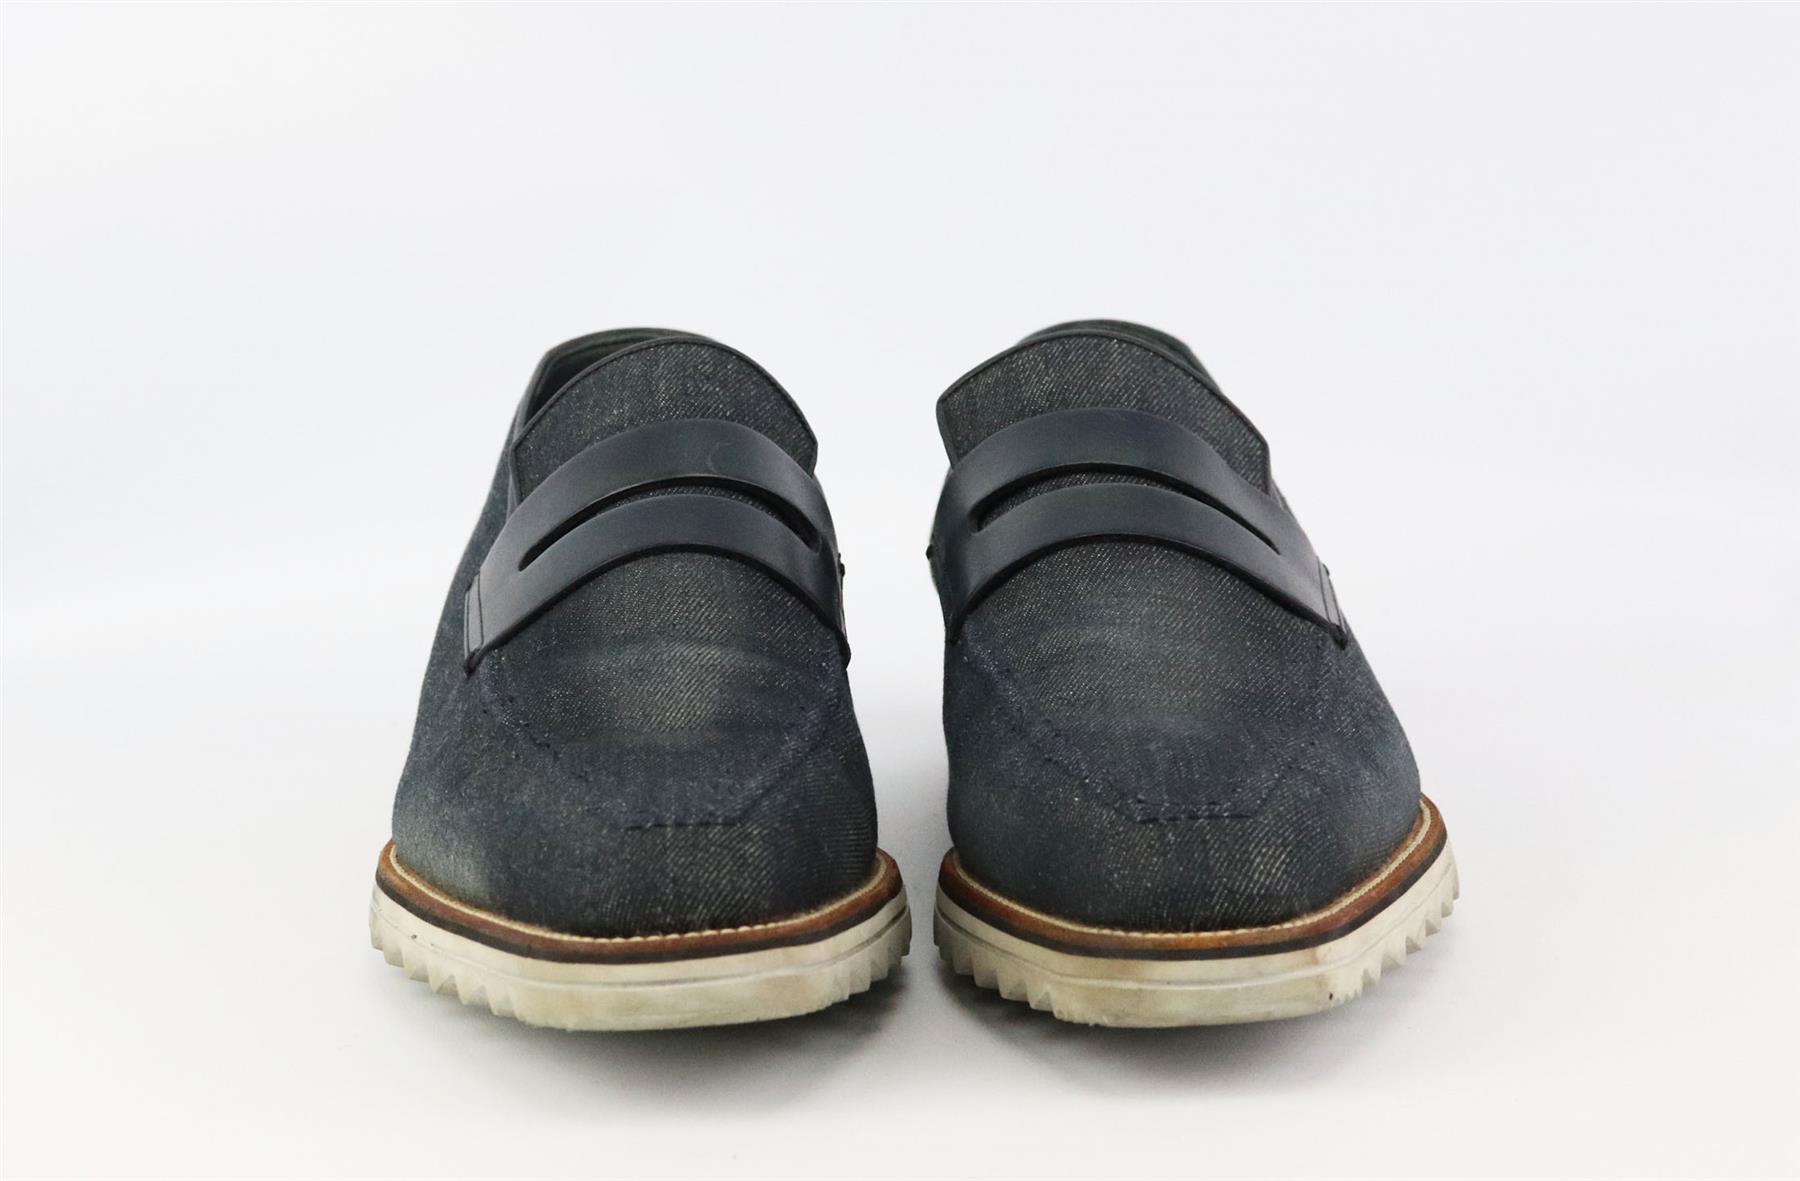 These men’s loafers by Berluti are a modern update to the classic penny loafer, these slip-on shoes come in sleek leather-trimmed intentionally faded denim with contrast white rubber soles. Heel measures approximately 25mm/ 1 inch. Navy leather,